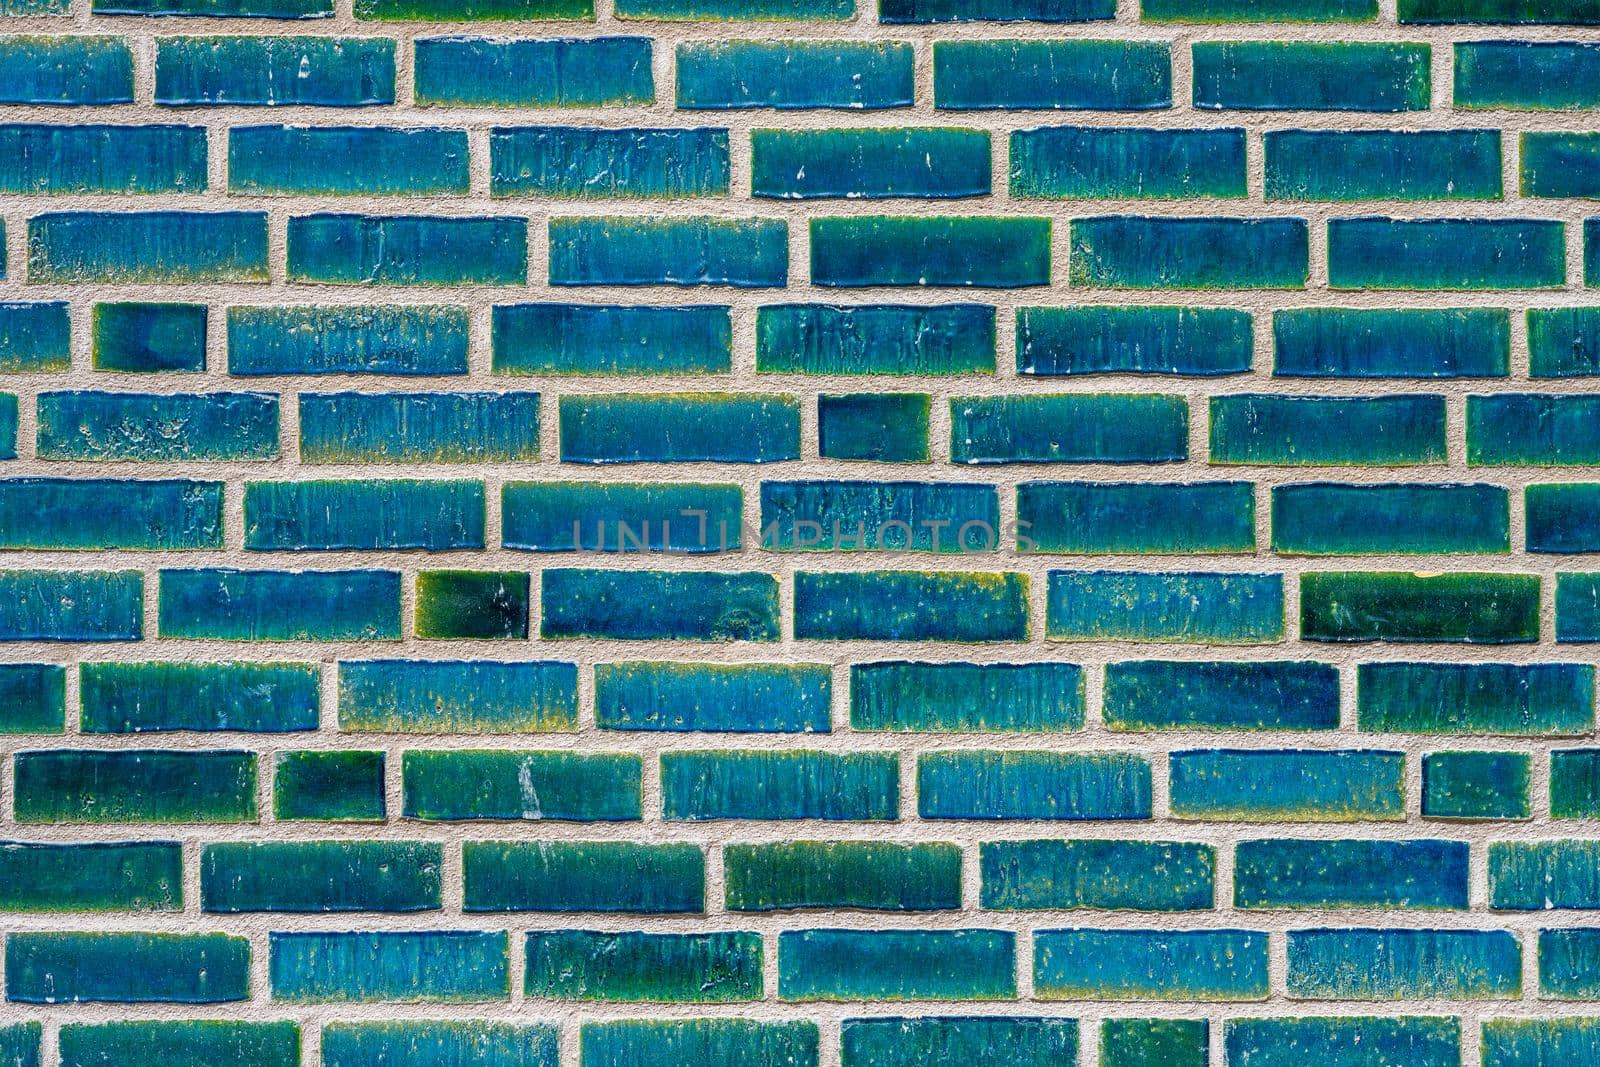 Wall made of turquoise bricks by elxeneize